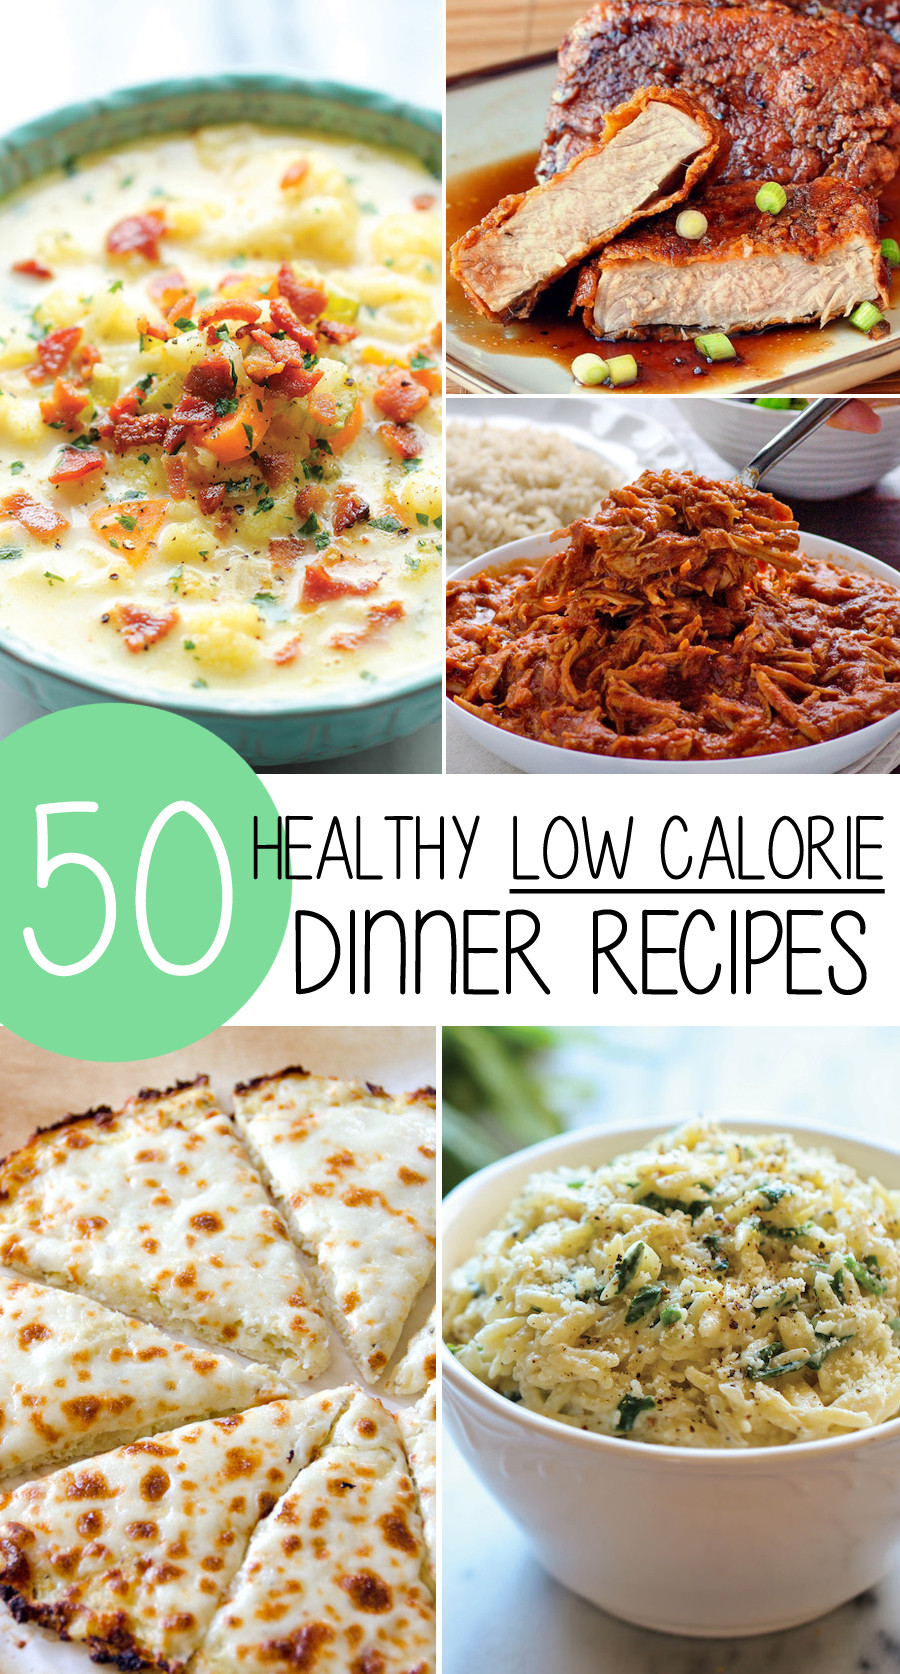 Low Calorie Food Recipes
 50 Healthy Low Calorie Weight Loss Dinner Recipes